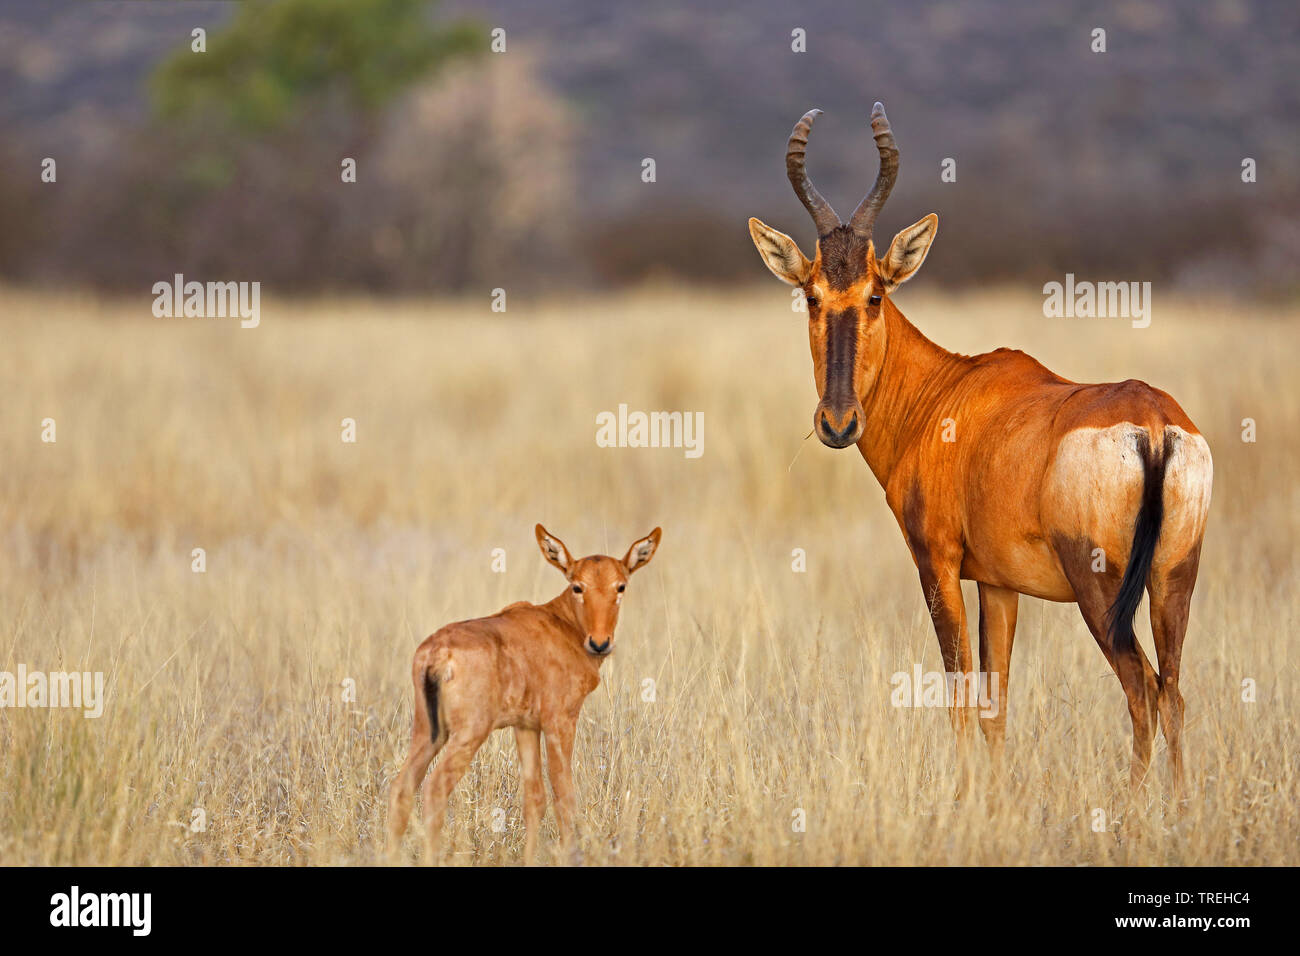 red hartebeest (Alcelaphus buselaphus), female with its calv stand in savanna, South Africa, Mokala National Park Stock Photo